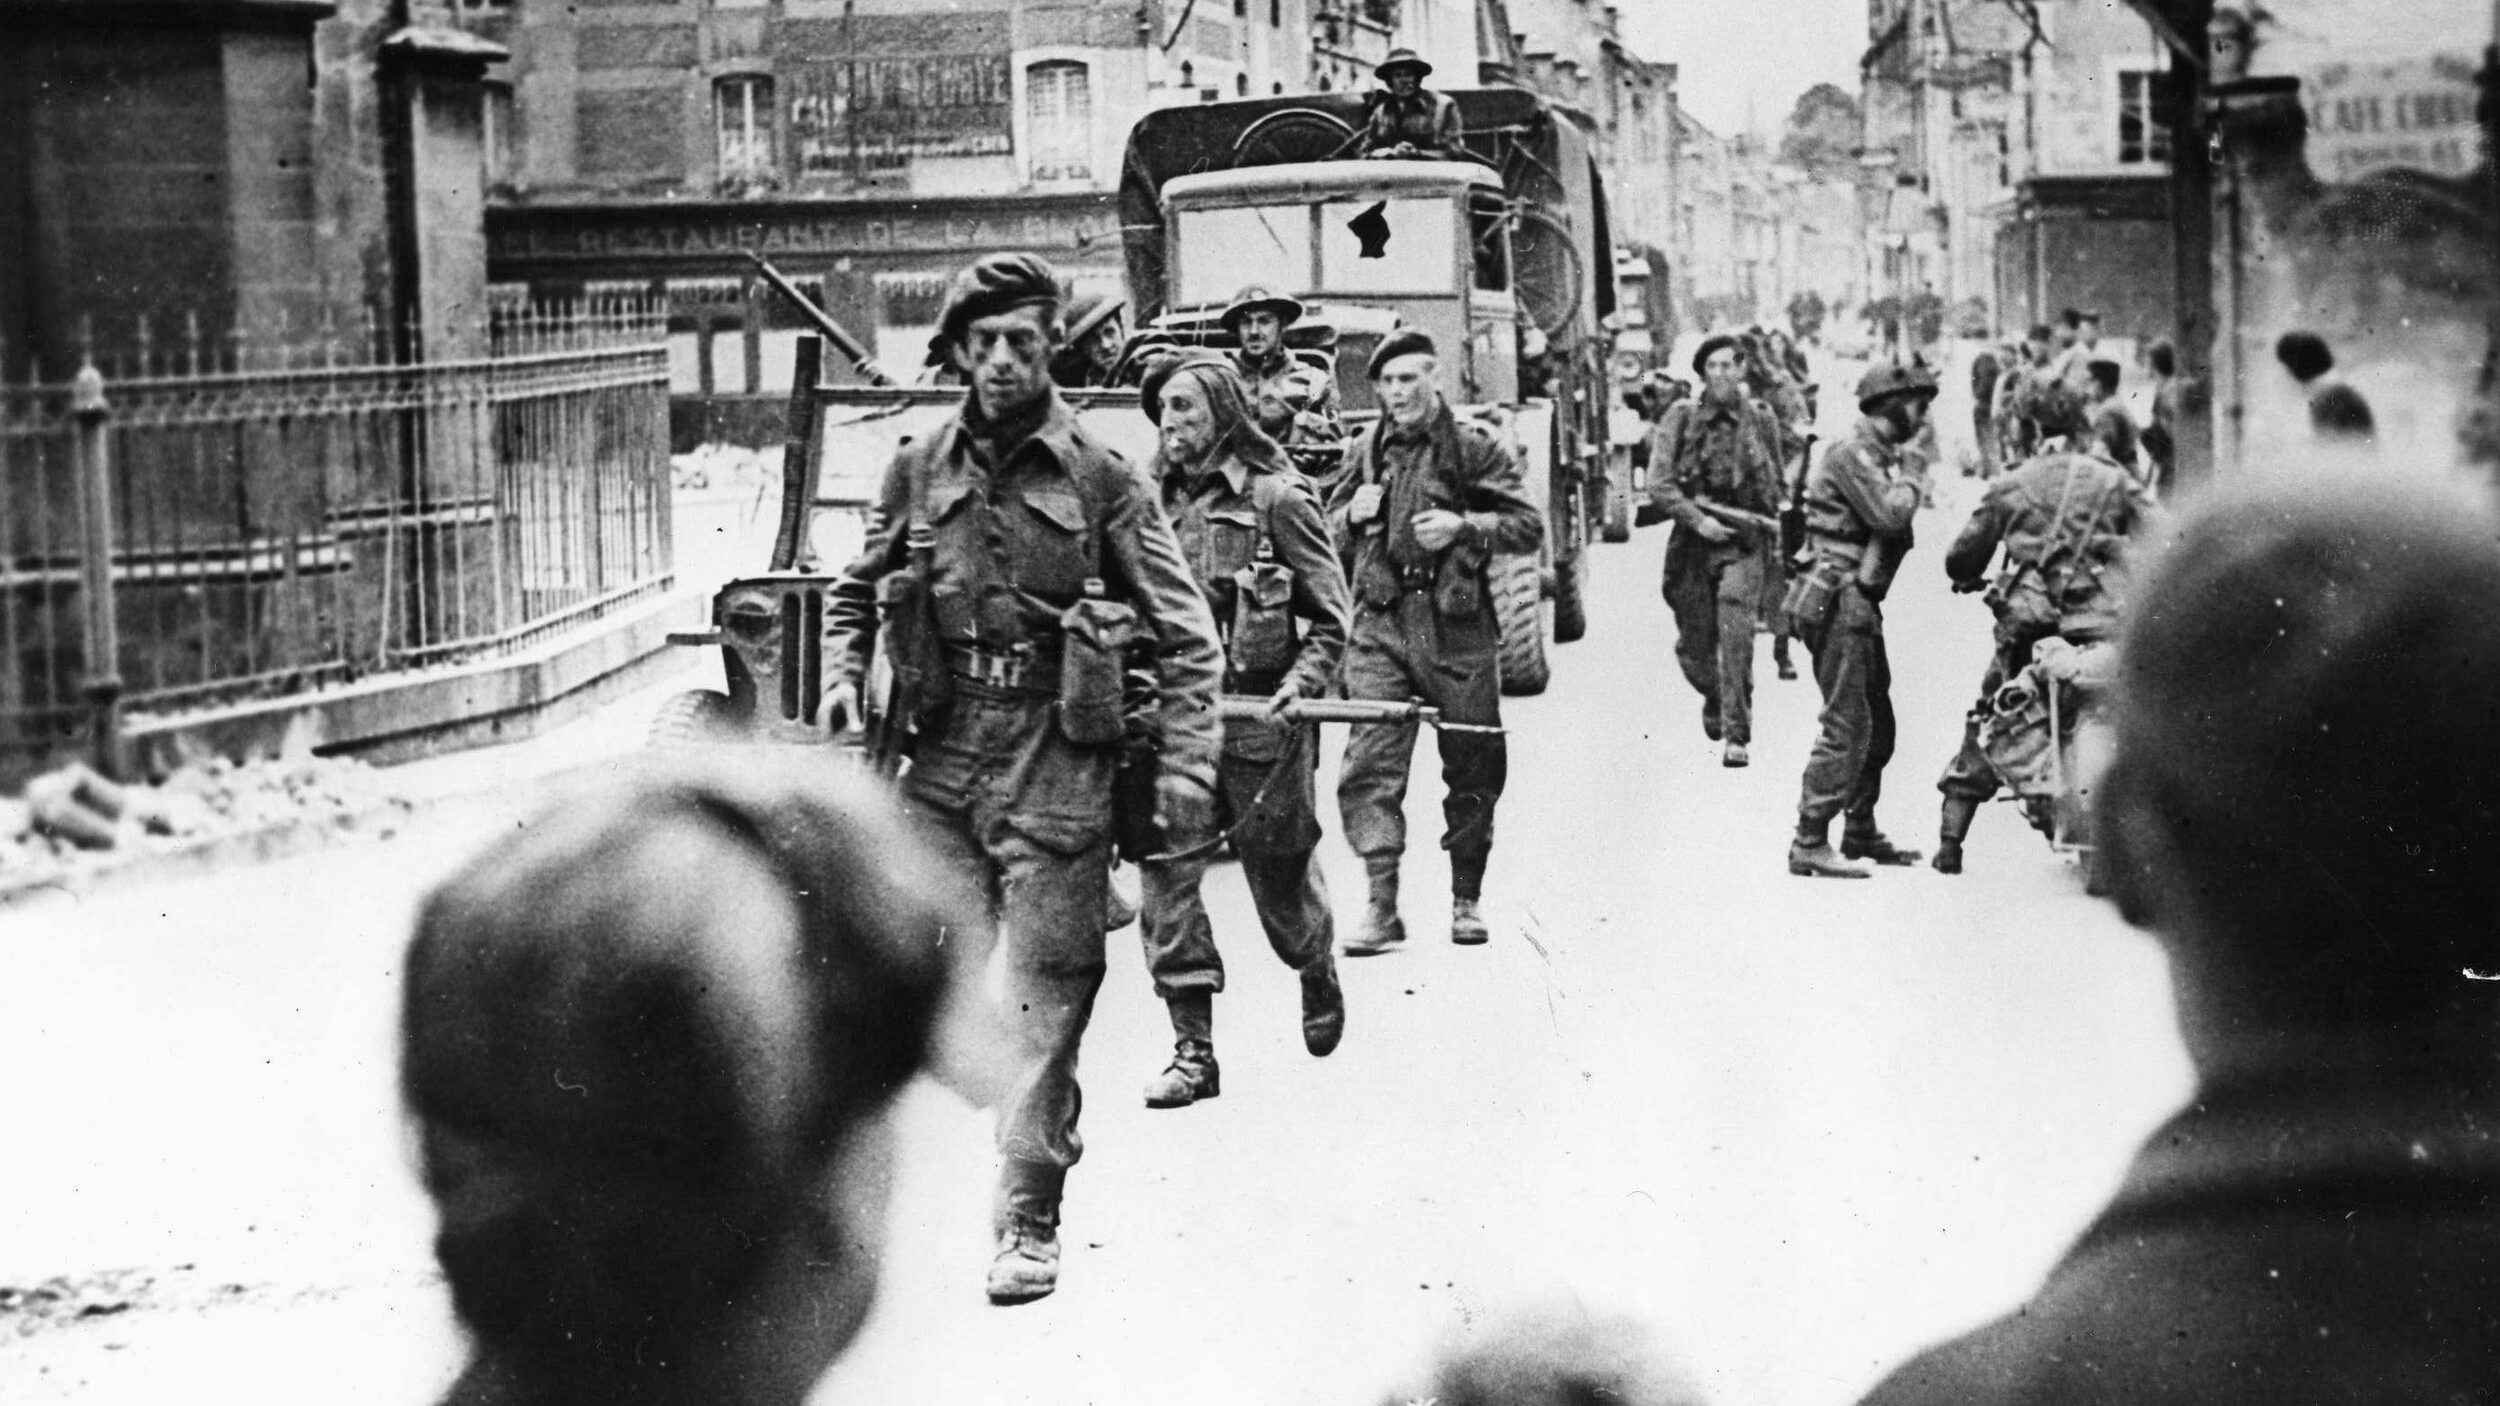 British commandos march through the ruins of the French town of Caen. An objective of the Allied D-Day landings that was supposed to have been captured on June 6, stiff German resistance prevented the city from being liberated until a month later.